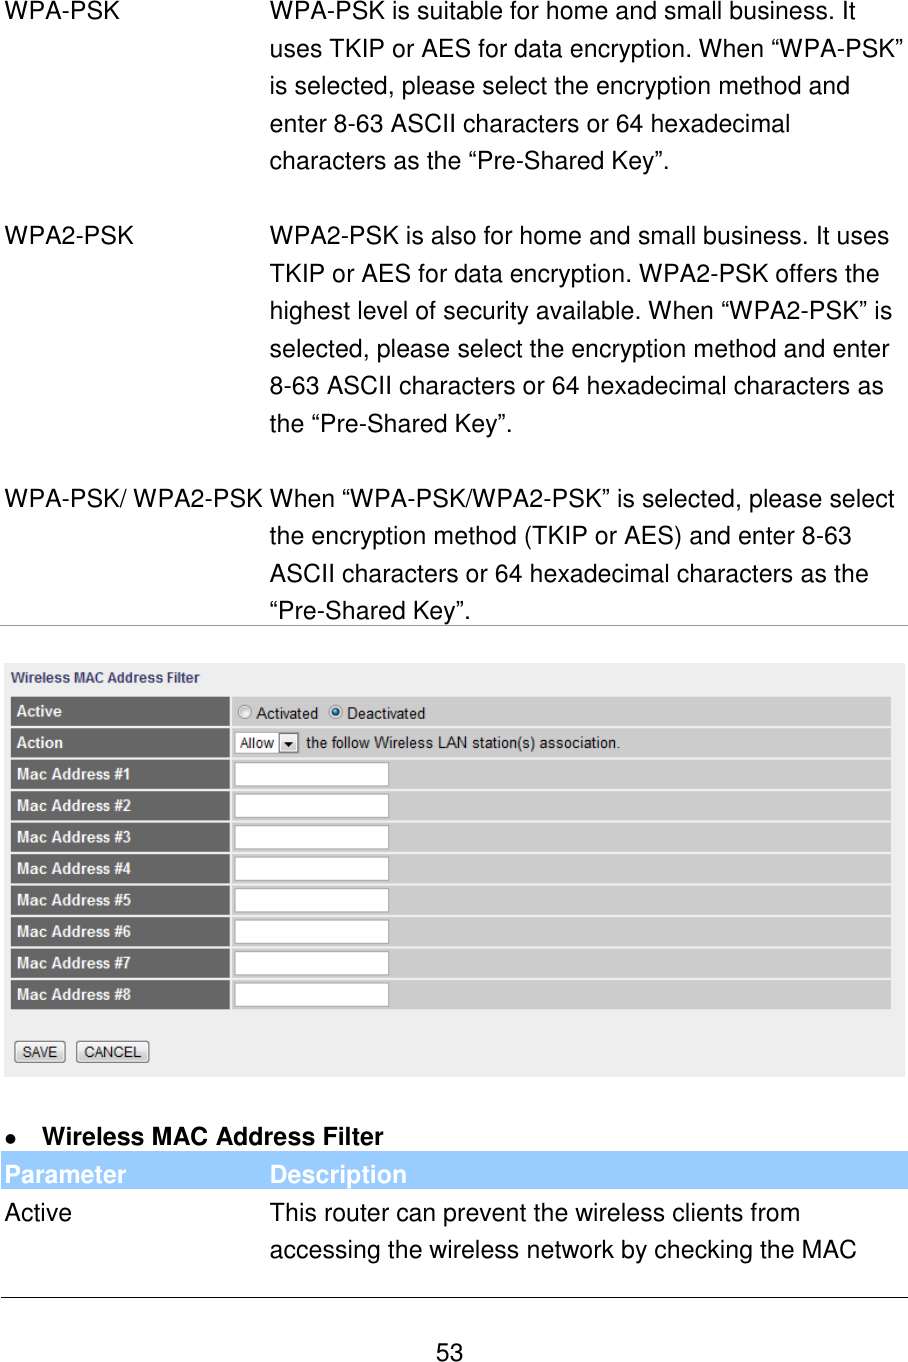   53   WPA-PSK WPA-PSK is suitable for home and small business. It uses TKIP or AES for data encryption. When “WPA-PSK” is selected, please select the encryption method and enter 8-63 ASCII characters or 64 hexadecimal characters as the “Pre-Shared Key”.   WPA2-PSK WPA2-PSK is also for home and small business. It uses TKIP or AES for data encryption. WPA2-PSK offers the highest level of security available. When “WPA2-PSK” is selected, please select the encryption method and enter 8-63 ASCII characters or 64 hexadecimal characters as the “Pre-Shared Key”.   WPA-PSK/ WPA2-PSK When “WPA-PSK/WPA2-PSK” is selected, please select the encryption method (TKIP or AES) and enter 8-63 ASCII characters or 64 hexadecimal characters as the “Pre-Shared Key”.     Wireless MAC Address Filter Parameter Description Active This router can prevent the wireless clients from accessing the wireless network by checking the MAC 